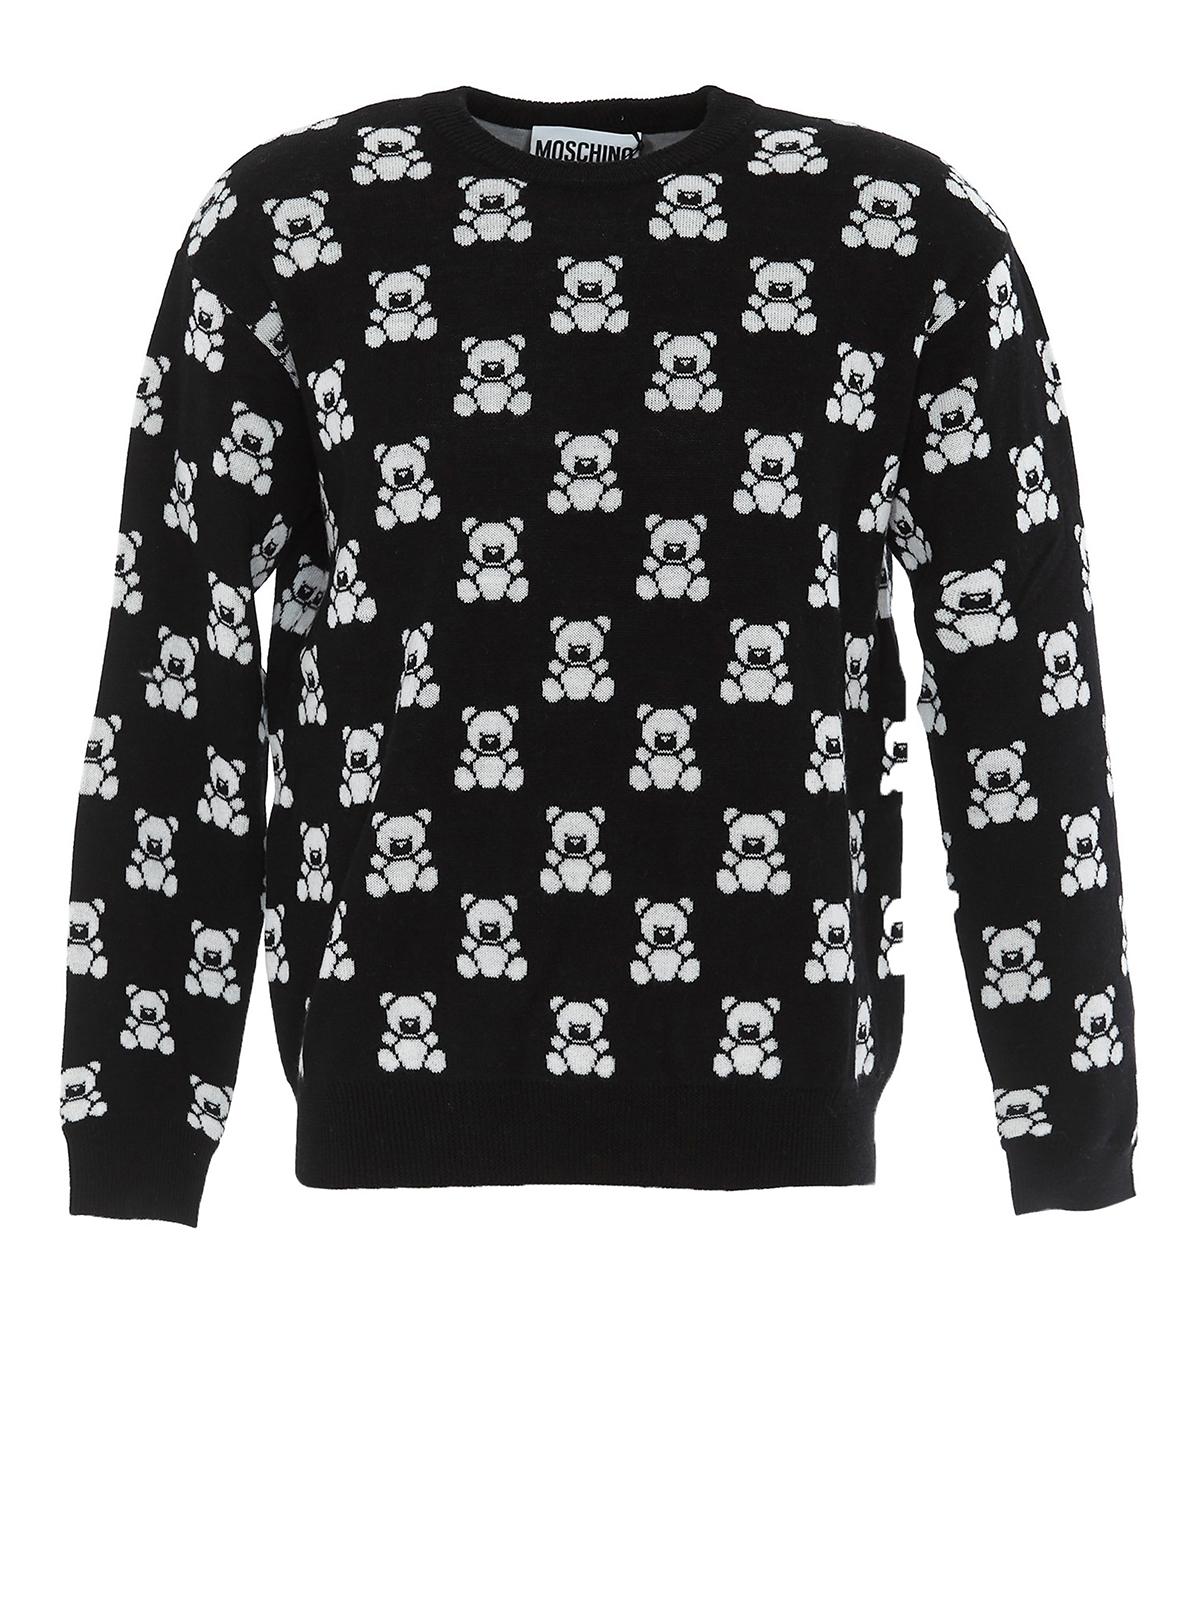 Moschino Teddy Bear Jacquard Wool Sweater in Black for Men - Lyst